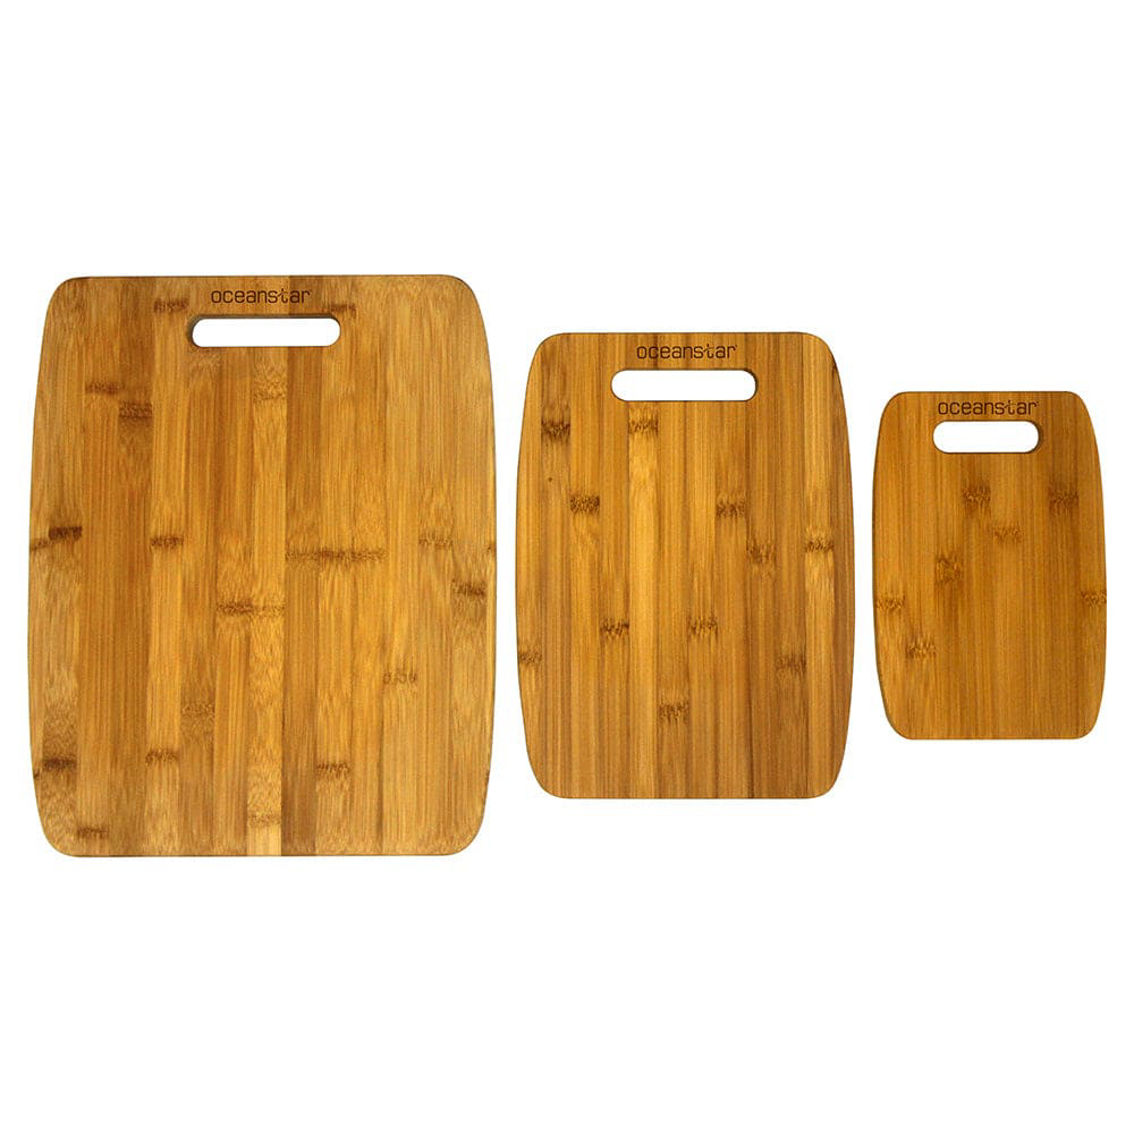 Oceanstar 3-Piece Bamboo Cutting Board Set - Image 4 of 4